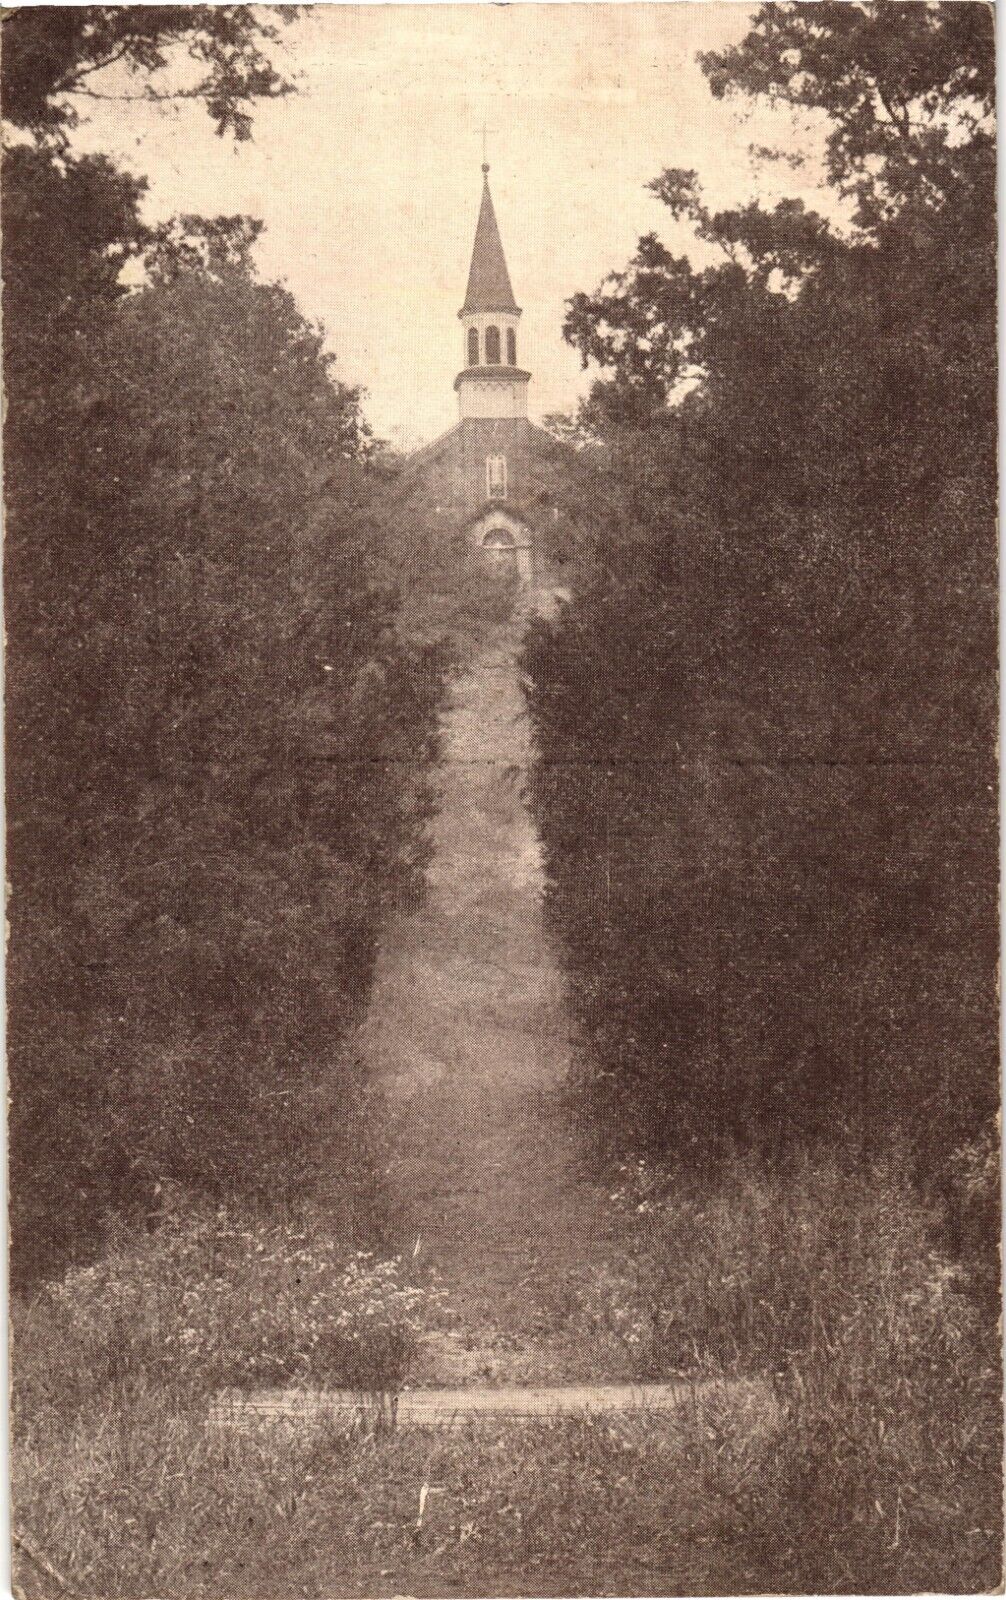 Chapel of the Sorrowful Mother Ferdinand IN Indiana Divided Postcard Vintage